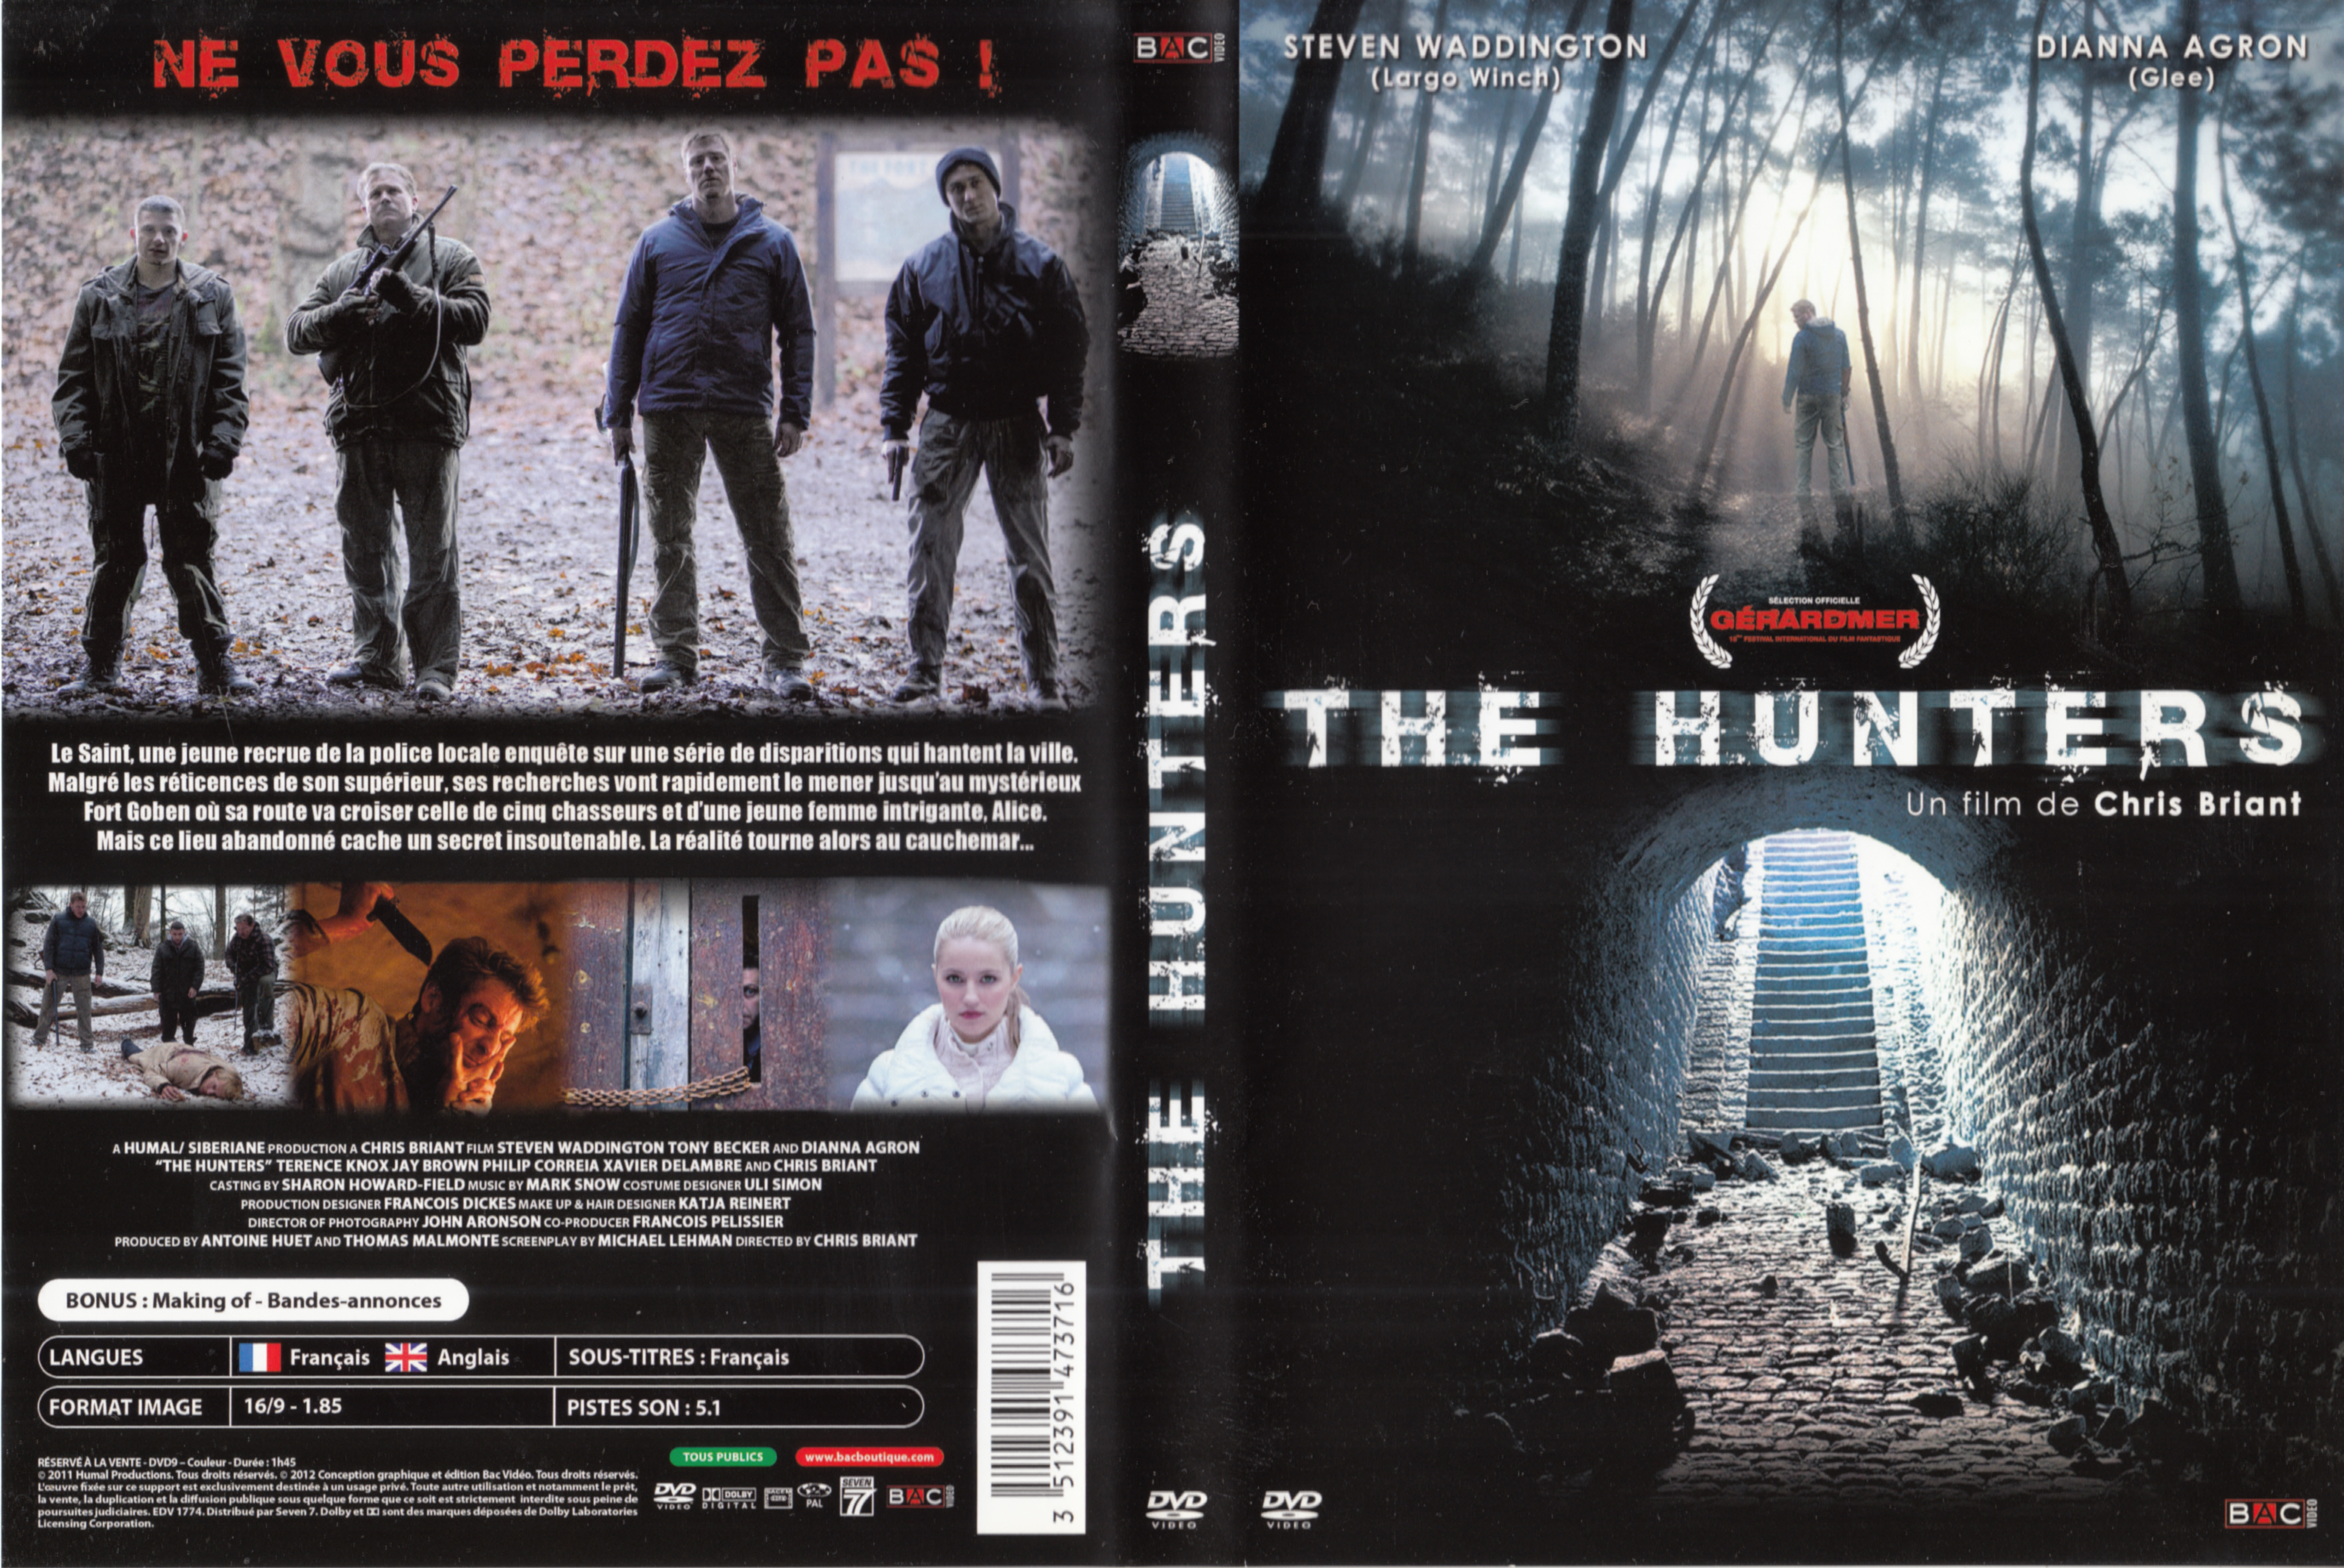 Jaquette DVD The Hunters